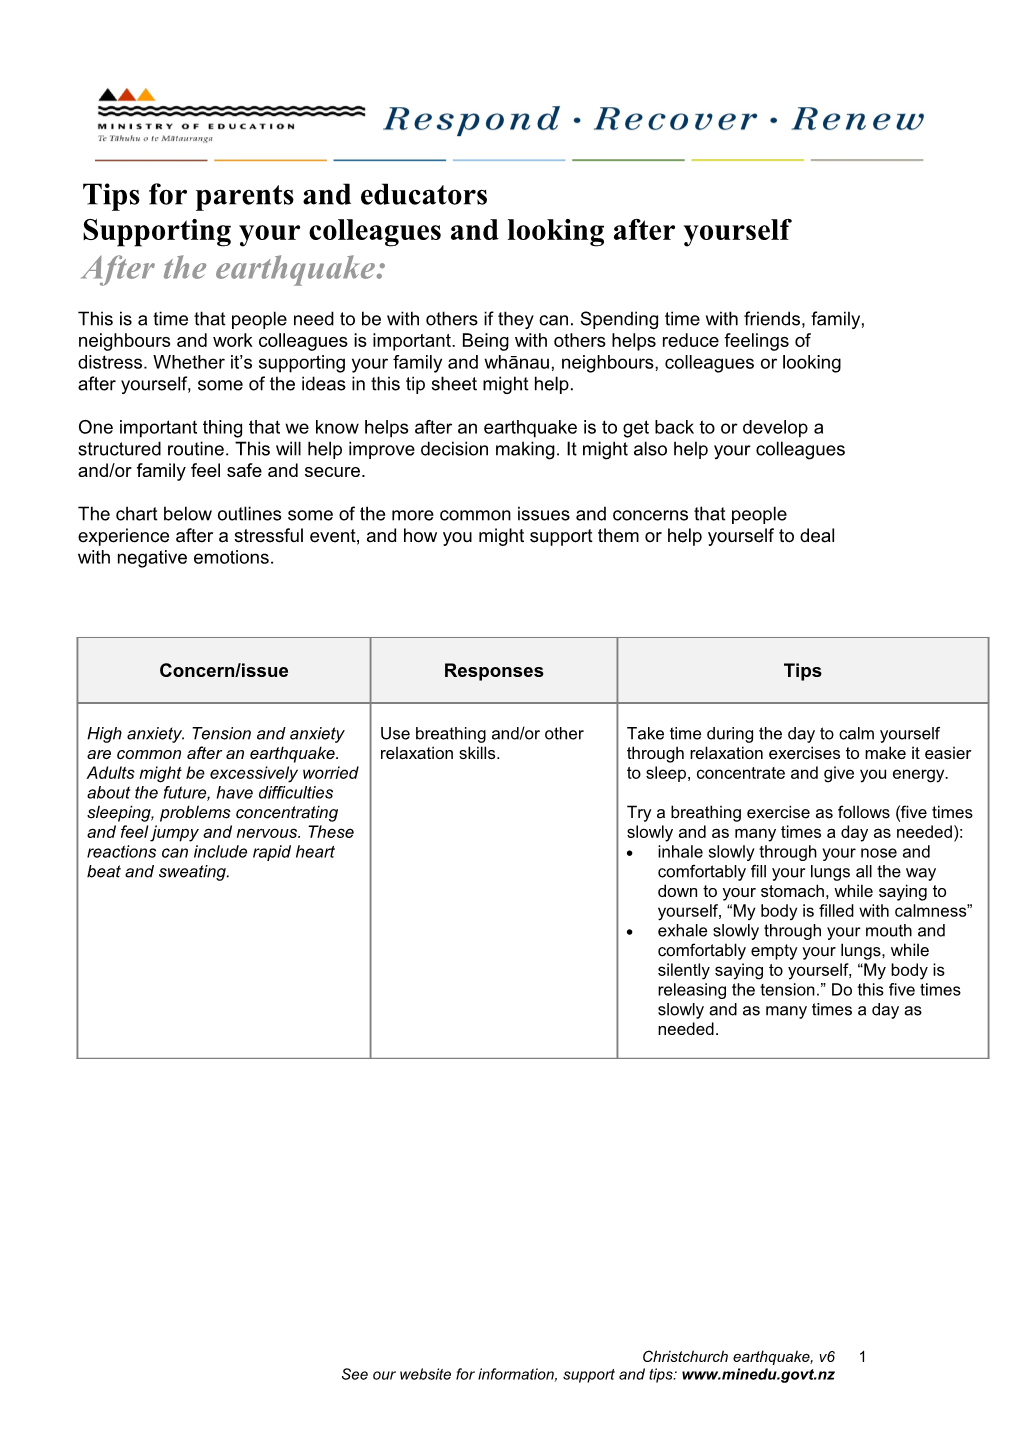 Tips for Parents and Educators: Supporting Your Colleagues and Looking After Yourself